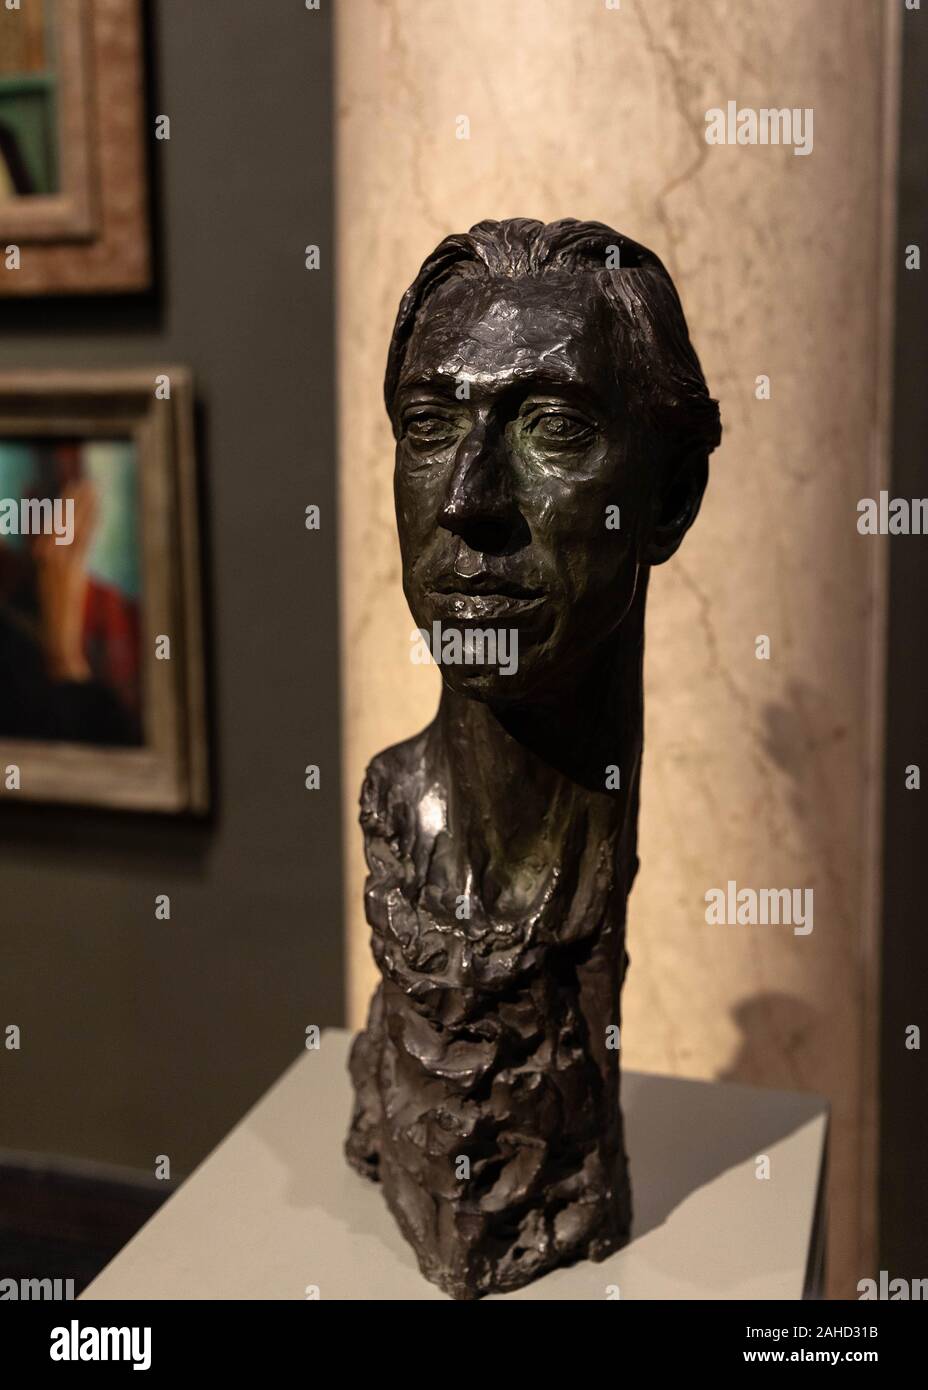 Bronze bust of a man, National Portrait Gallery, London, England, UK. Stock Photo